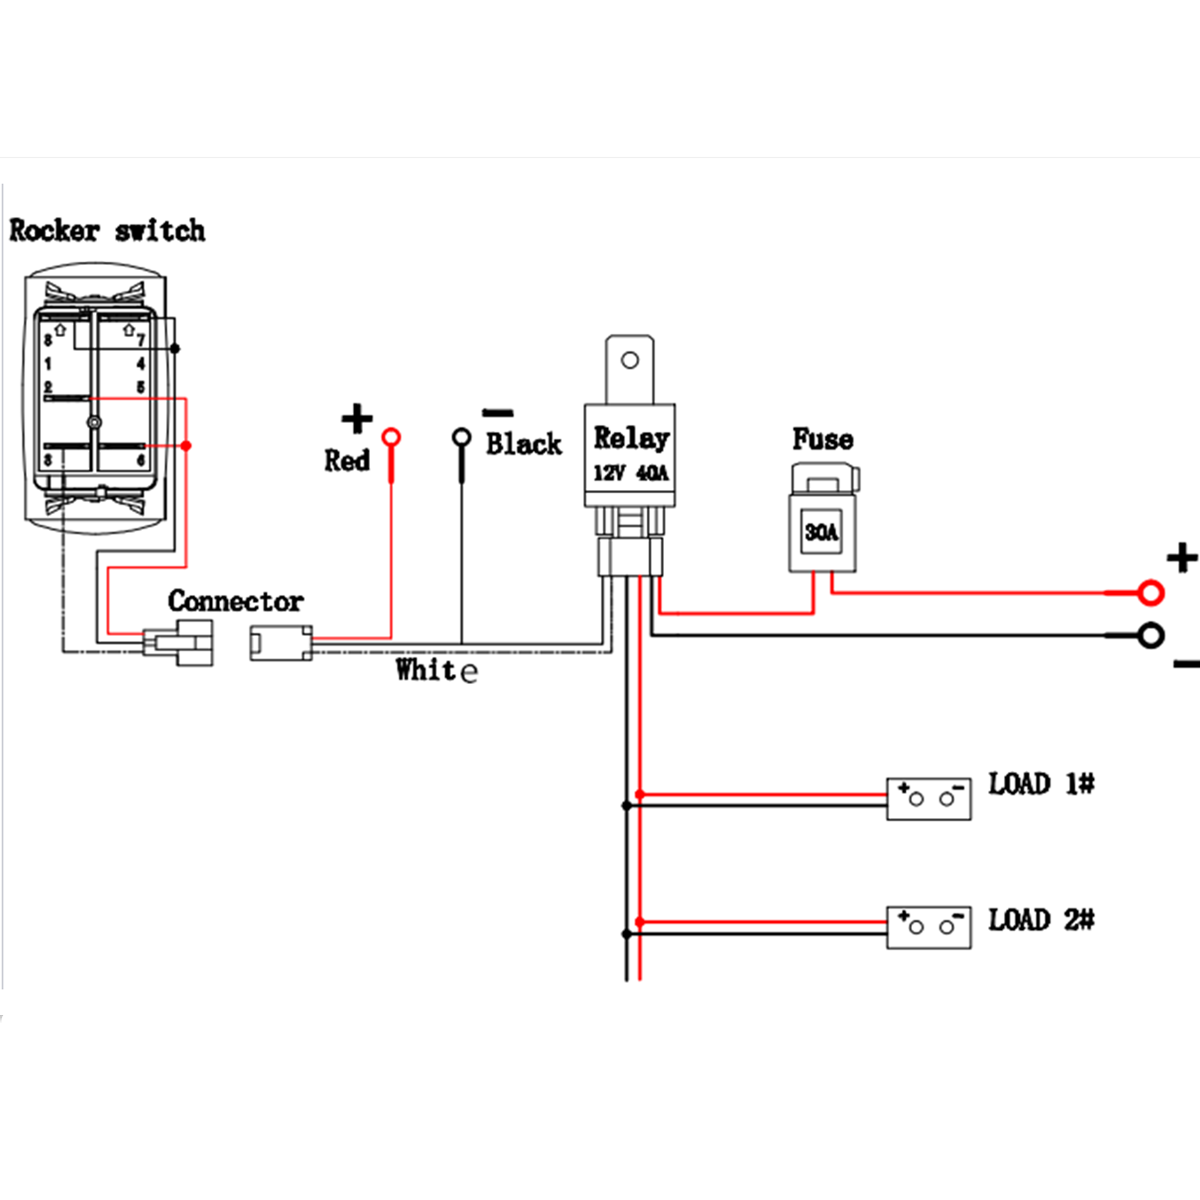 Relay Wiring Diagram For Light Bar from schematron.org